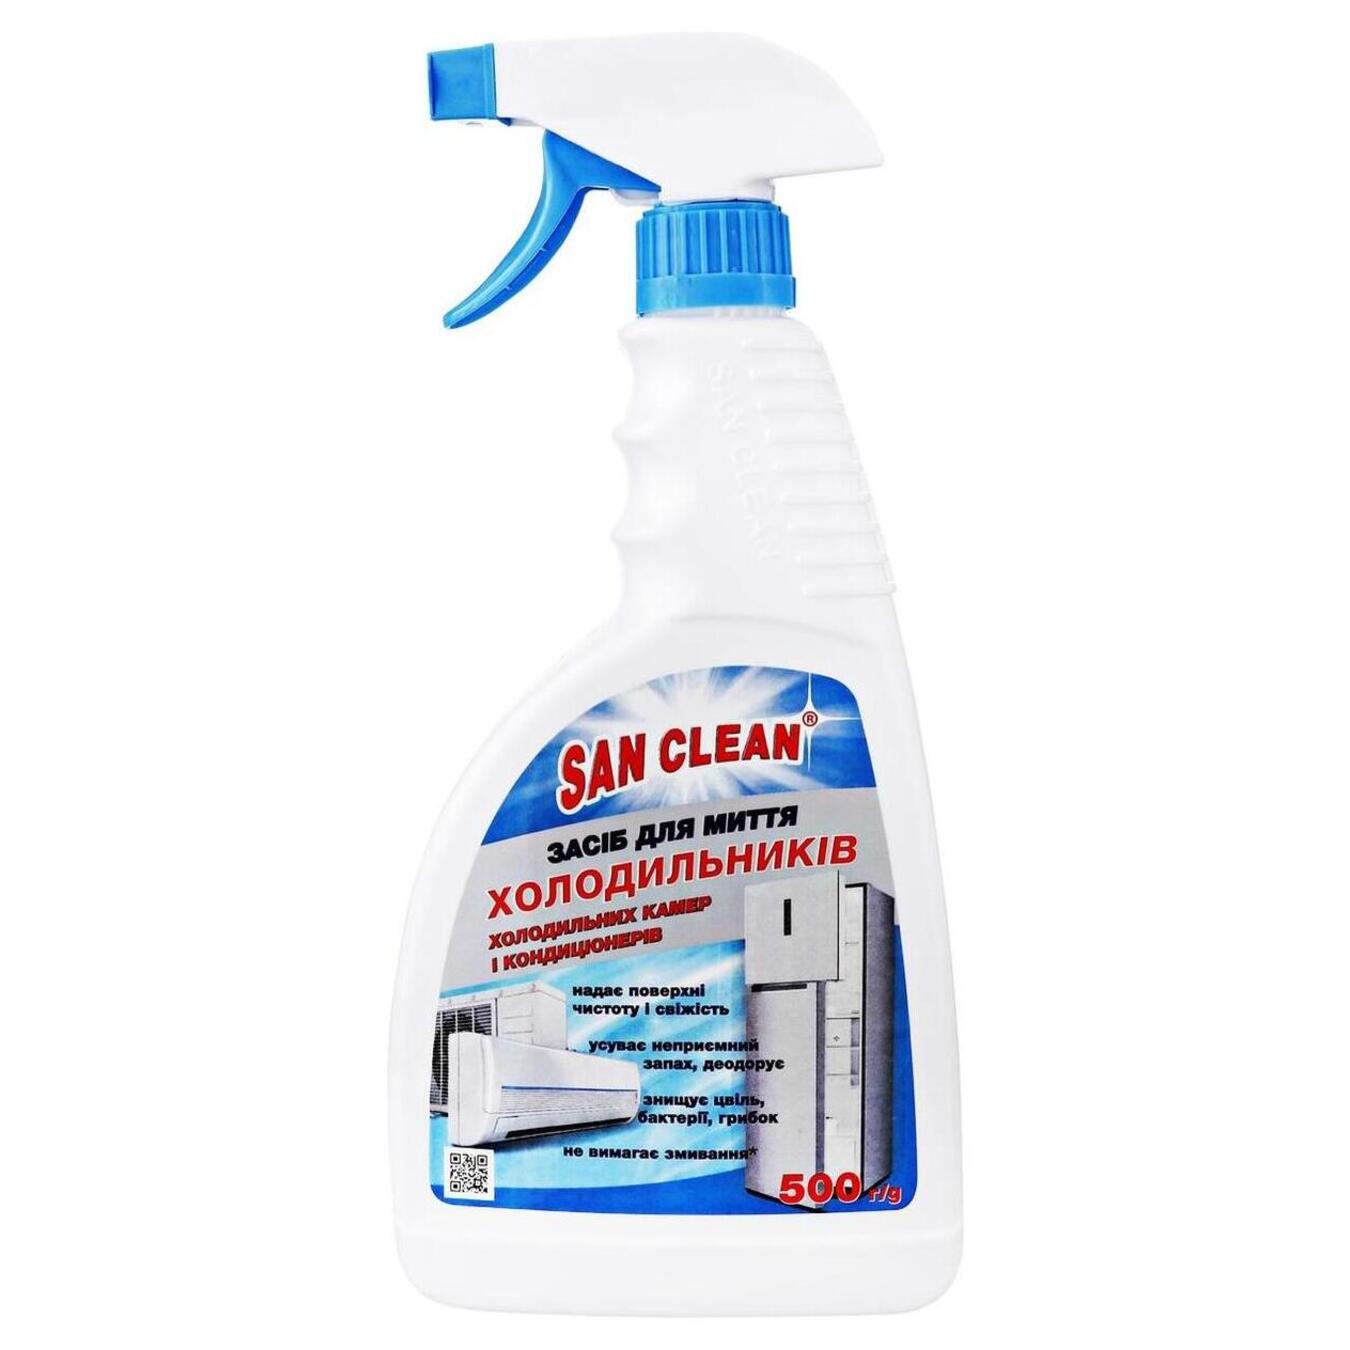 San-Clean means for washing refrigerators and air conditioners sprayer 0.5 l